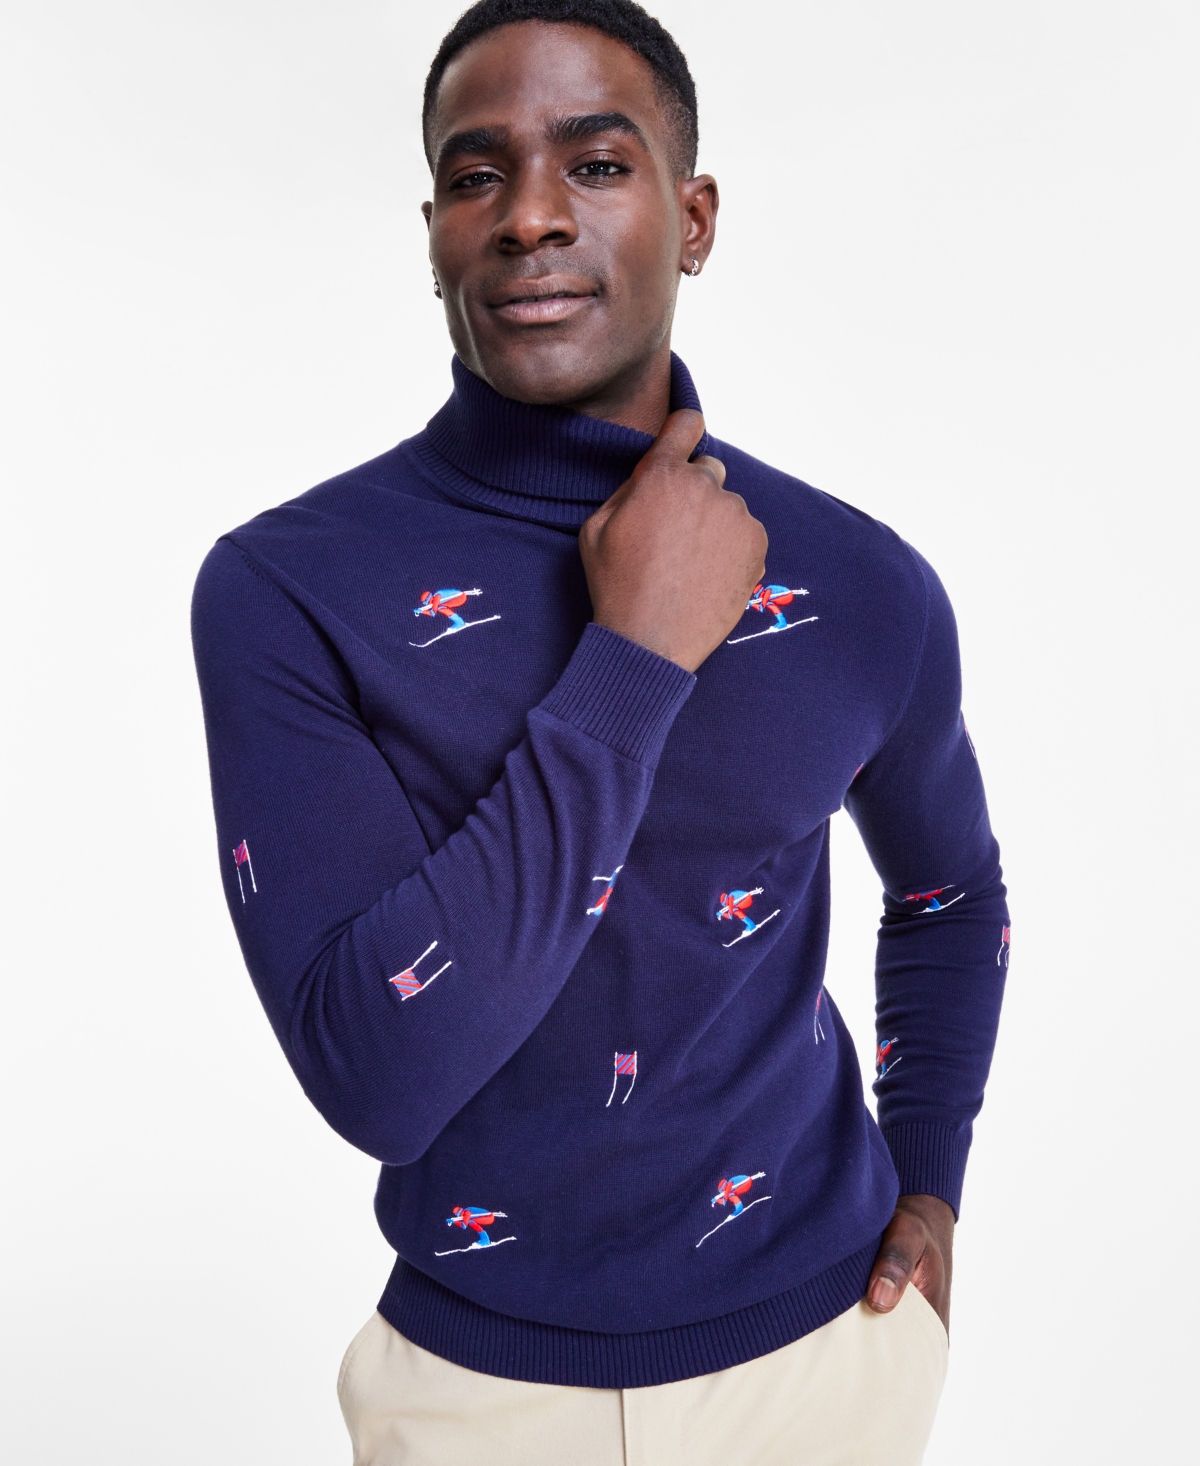 Men's Cotton Skier Embroidered Turtleneck Sweater, Created for Macy's - Navy Blue